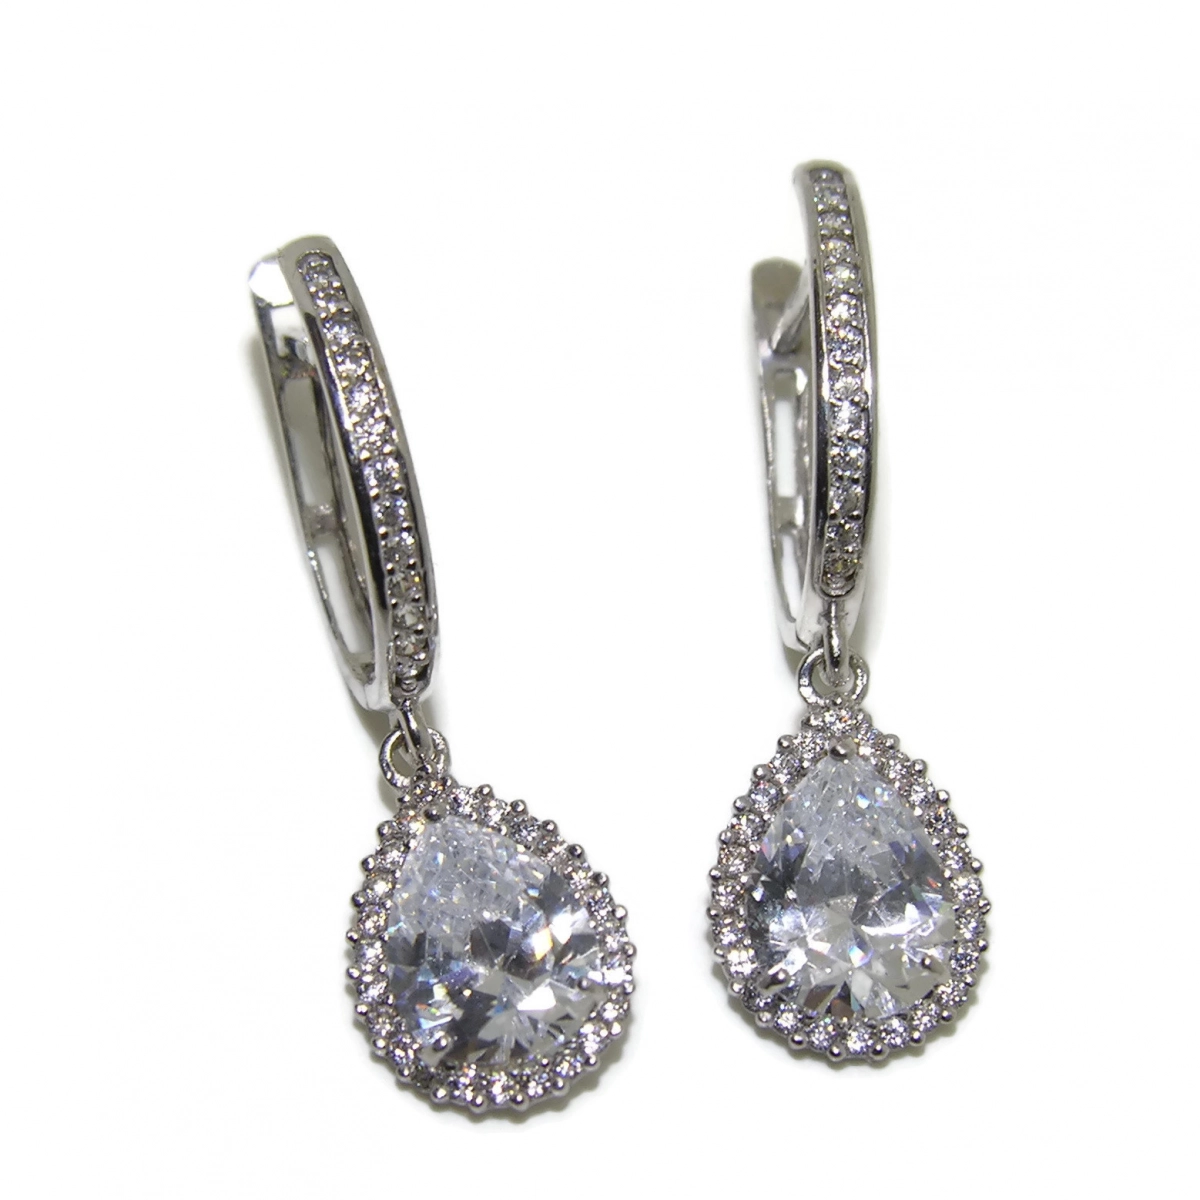 EARRINGS OF WHITE GOLD OF 18KTES AND ZIRCONS OF THE BEST QUALITY. NEVER SAY NEVER